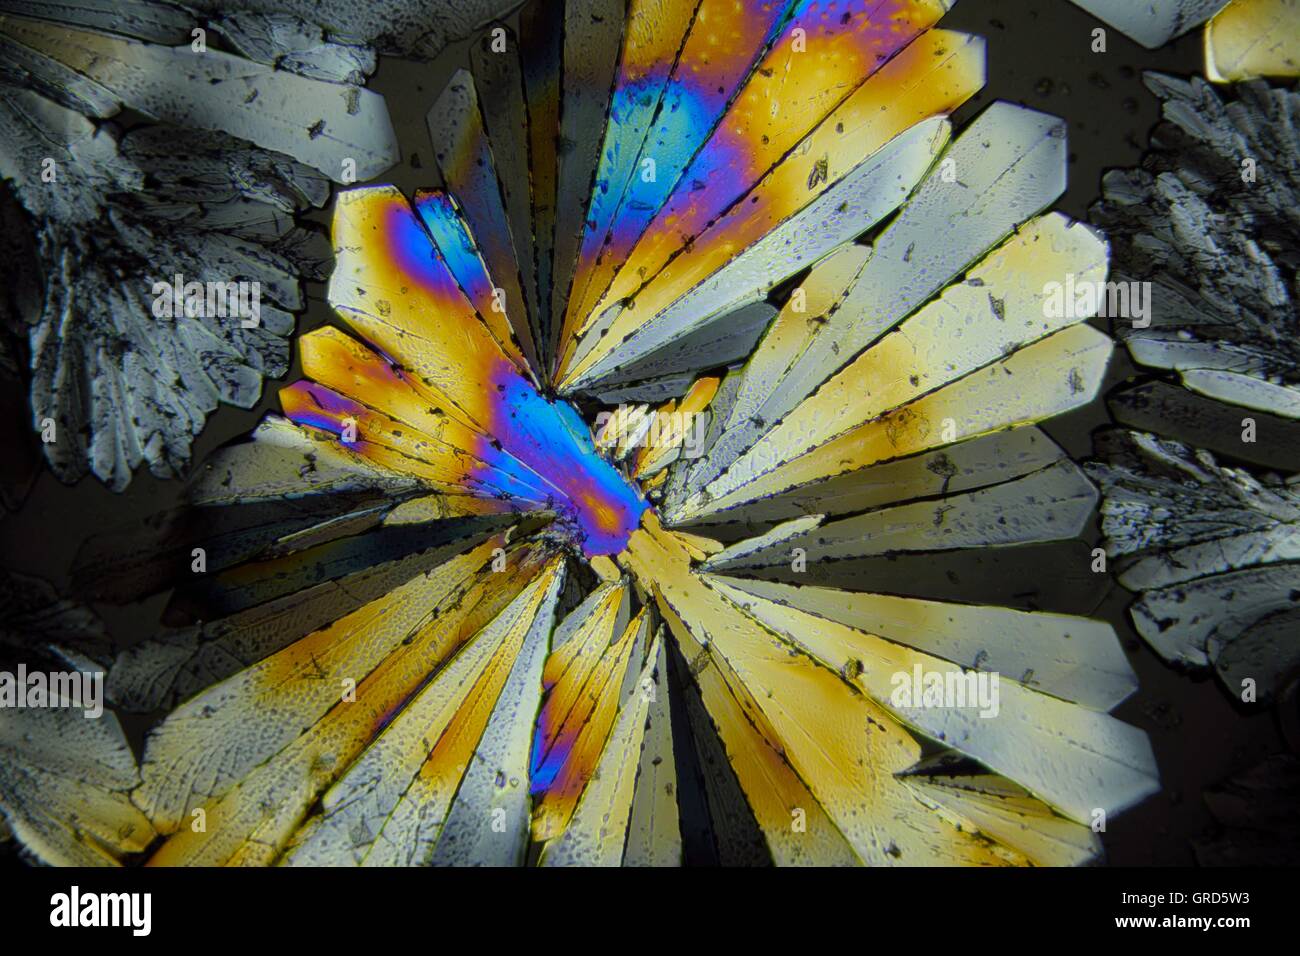 Sugar Crystal Under Microscop In Polarized Light. Magnification 100X Stock Photo